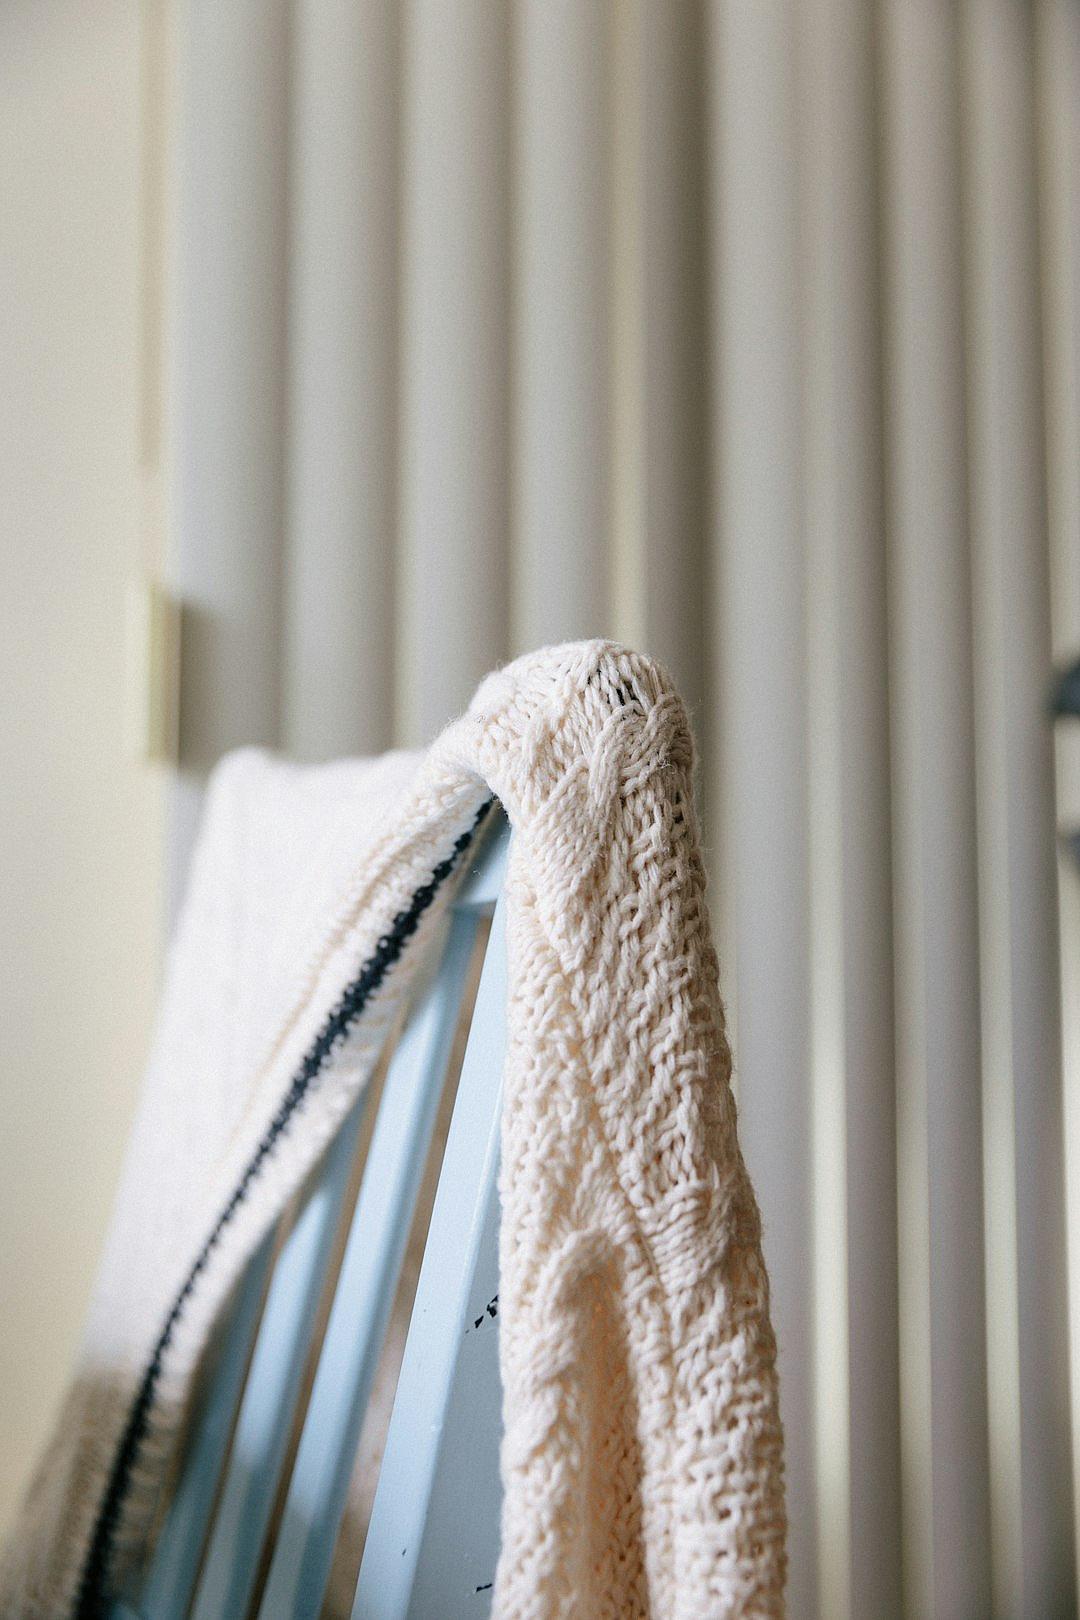 A closeup of the edge of an ivory knit sweater draped over the armrest of a baby blue rocking chair, with vertical white blinds softly focused behind it. The sweater’s texture is highlighted by natural light, and its black trim adds contrast to the room’s neutral color scheme. This shot emphasizes the cozy feel created through the combination of fabric and wood in the style of a natural light photographer.